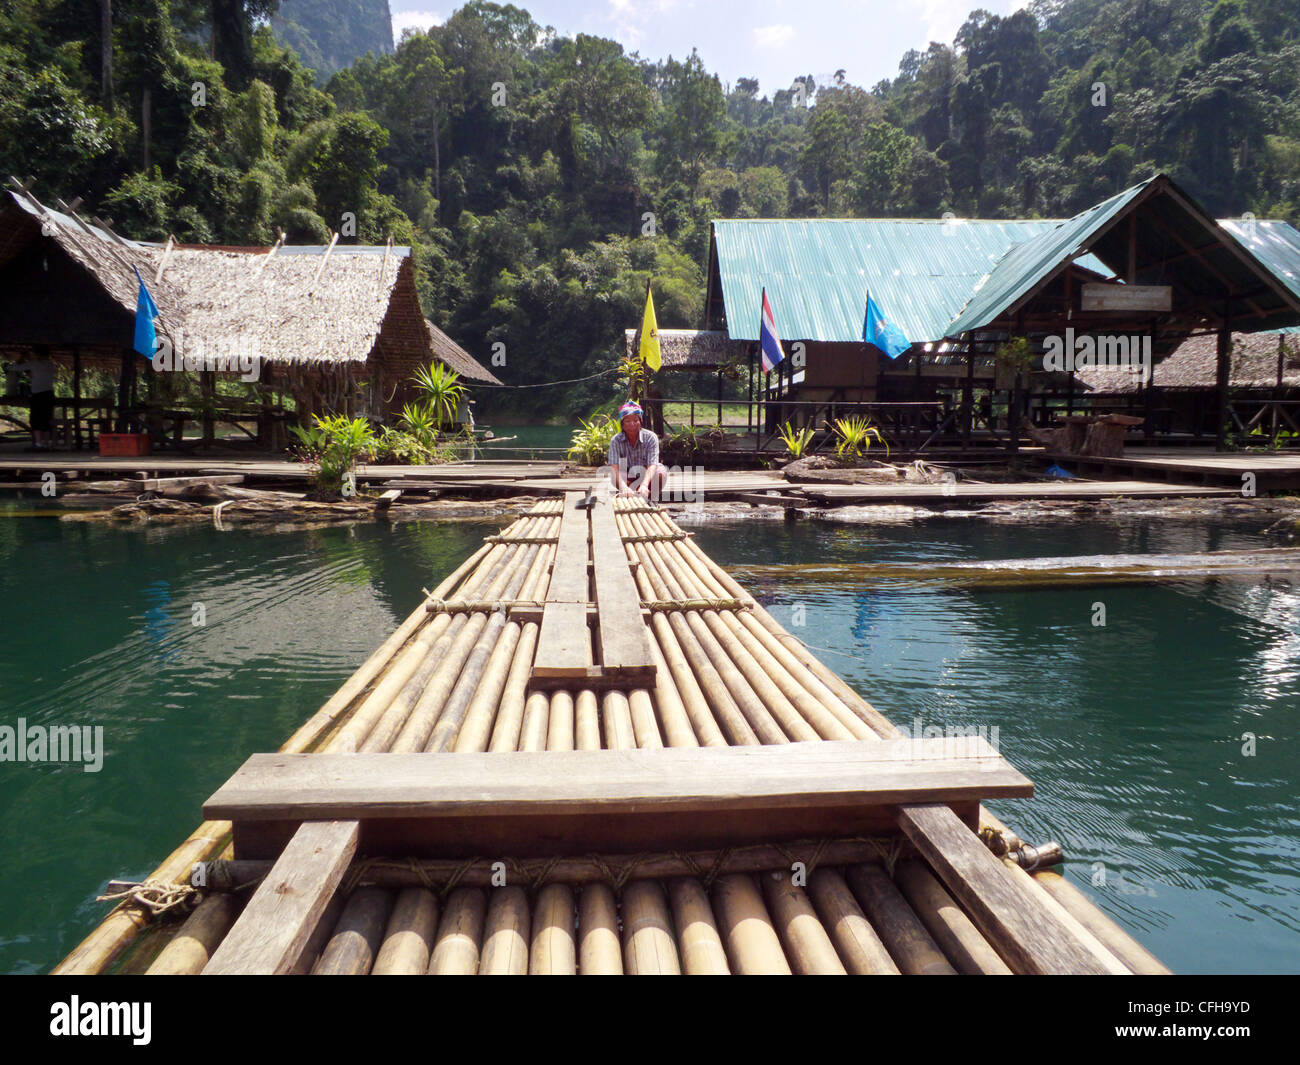 Bamboo raft station on the Chiaw Lan Lake, in the Khao Sok National Park Thailand. Jungle surrounded lake. Tourism. Stock Photo